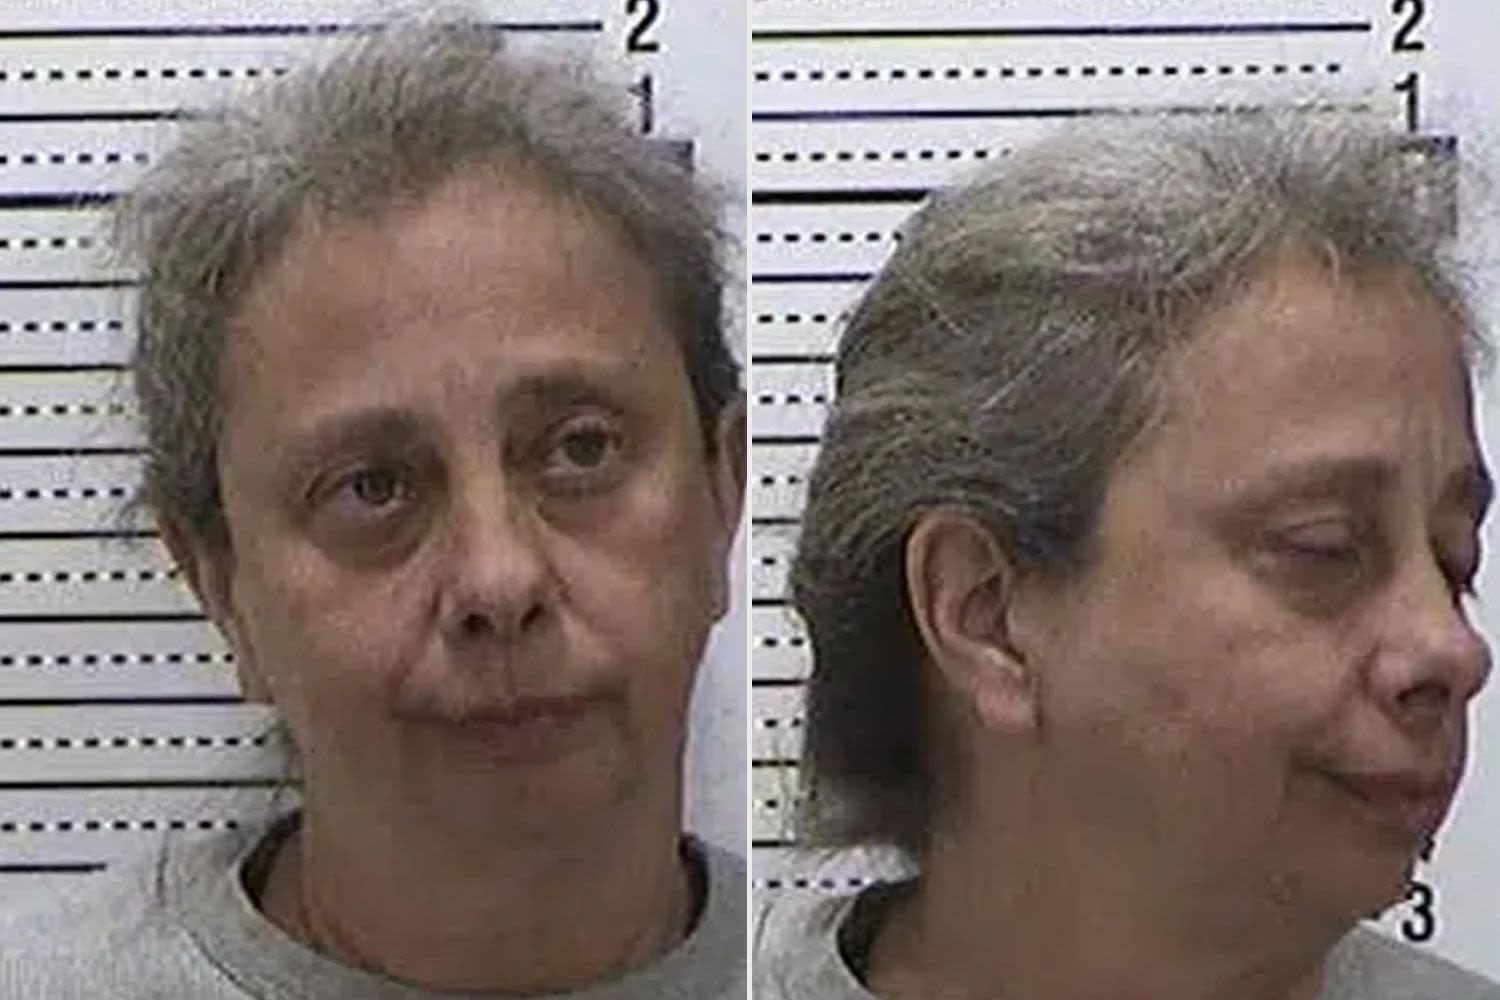 Woman Poisoned Boyfriend to Death Thinking He'd Inherited $30M. Then She Found Out It Was All a Scam